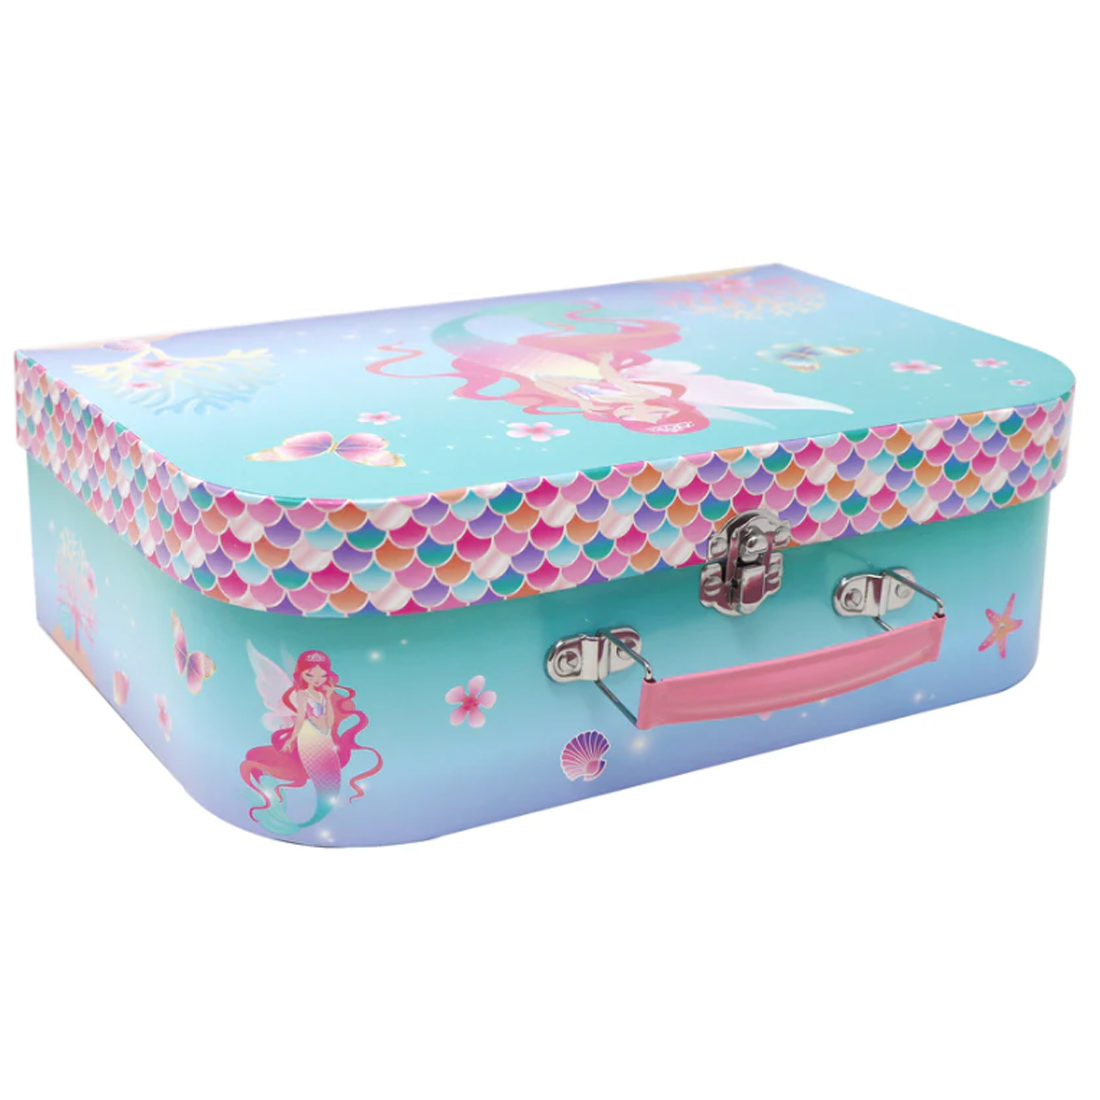 Shimmering Mermaid 6 piece Childs Baking Set & Carry Case